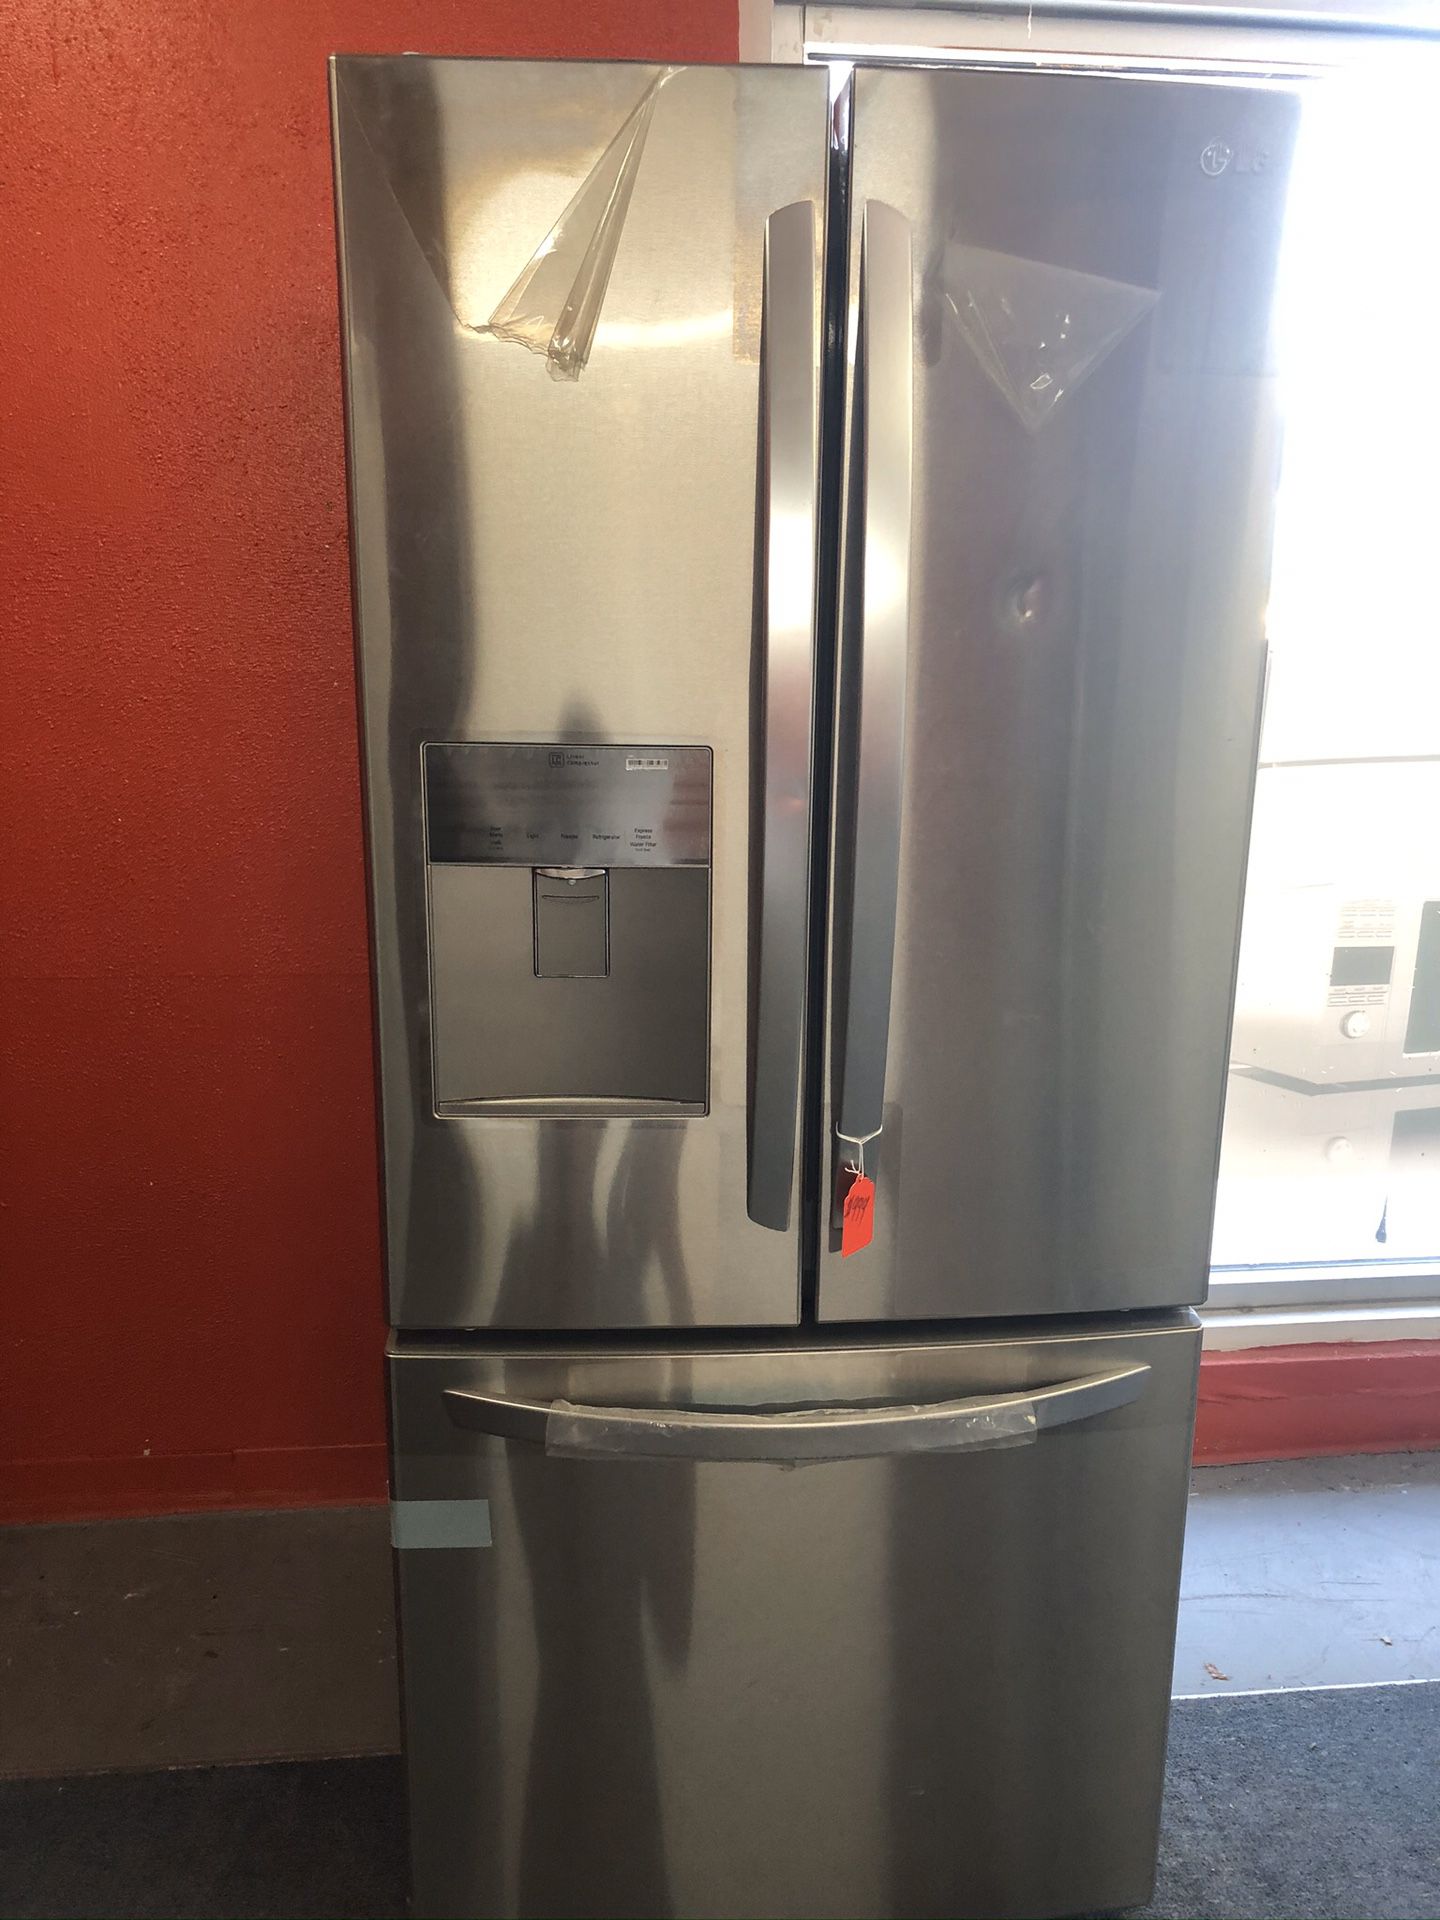 New scratch and dent LG 21 cu ft stainless steel French door fridge. 1 year warranty